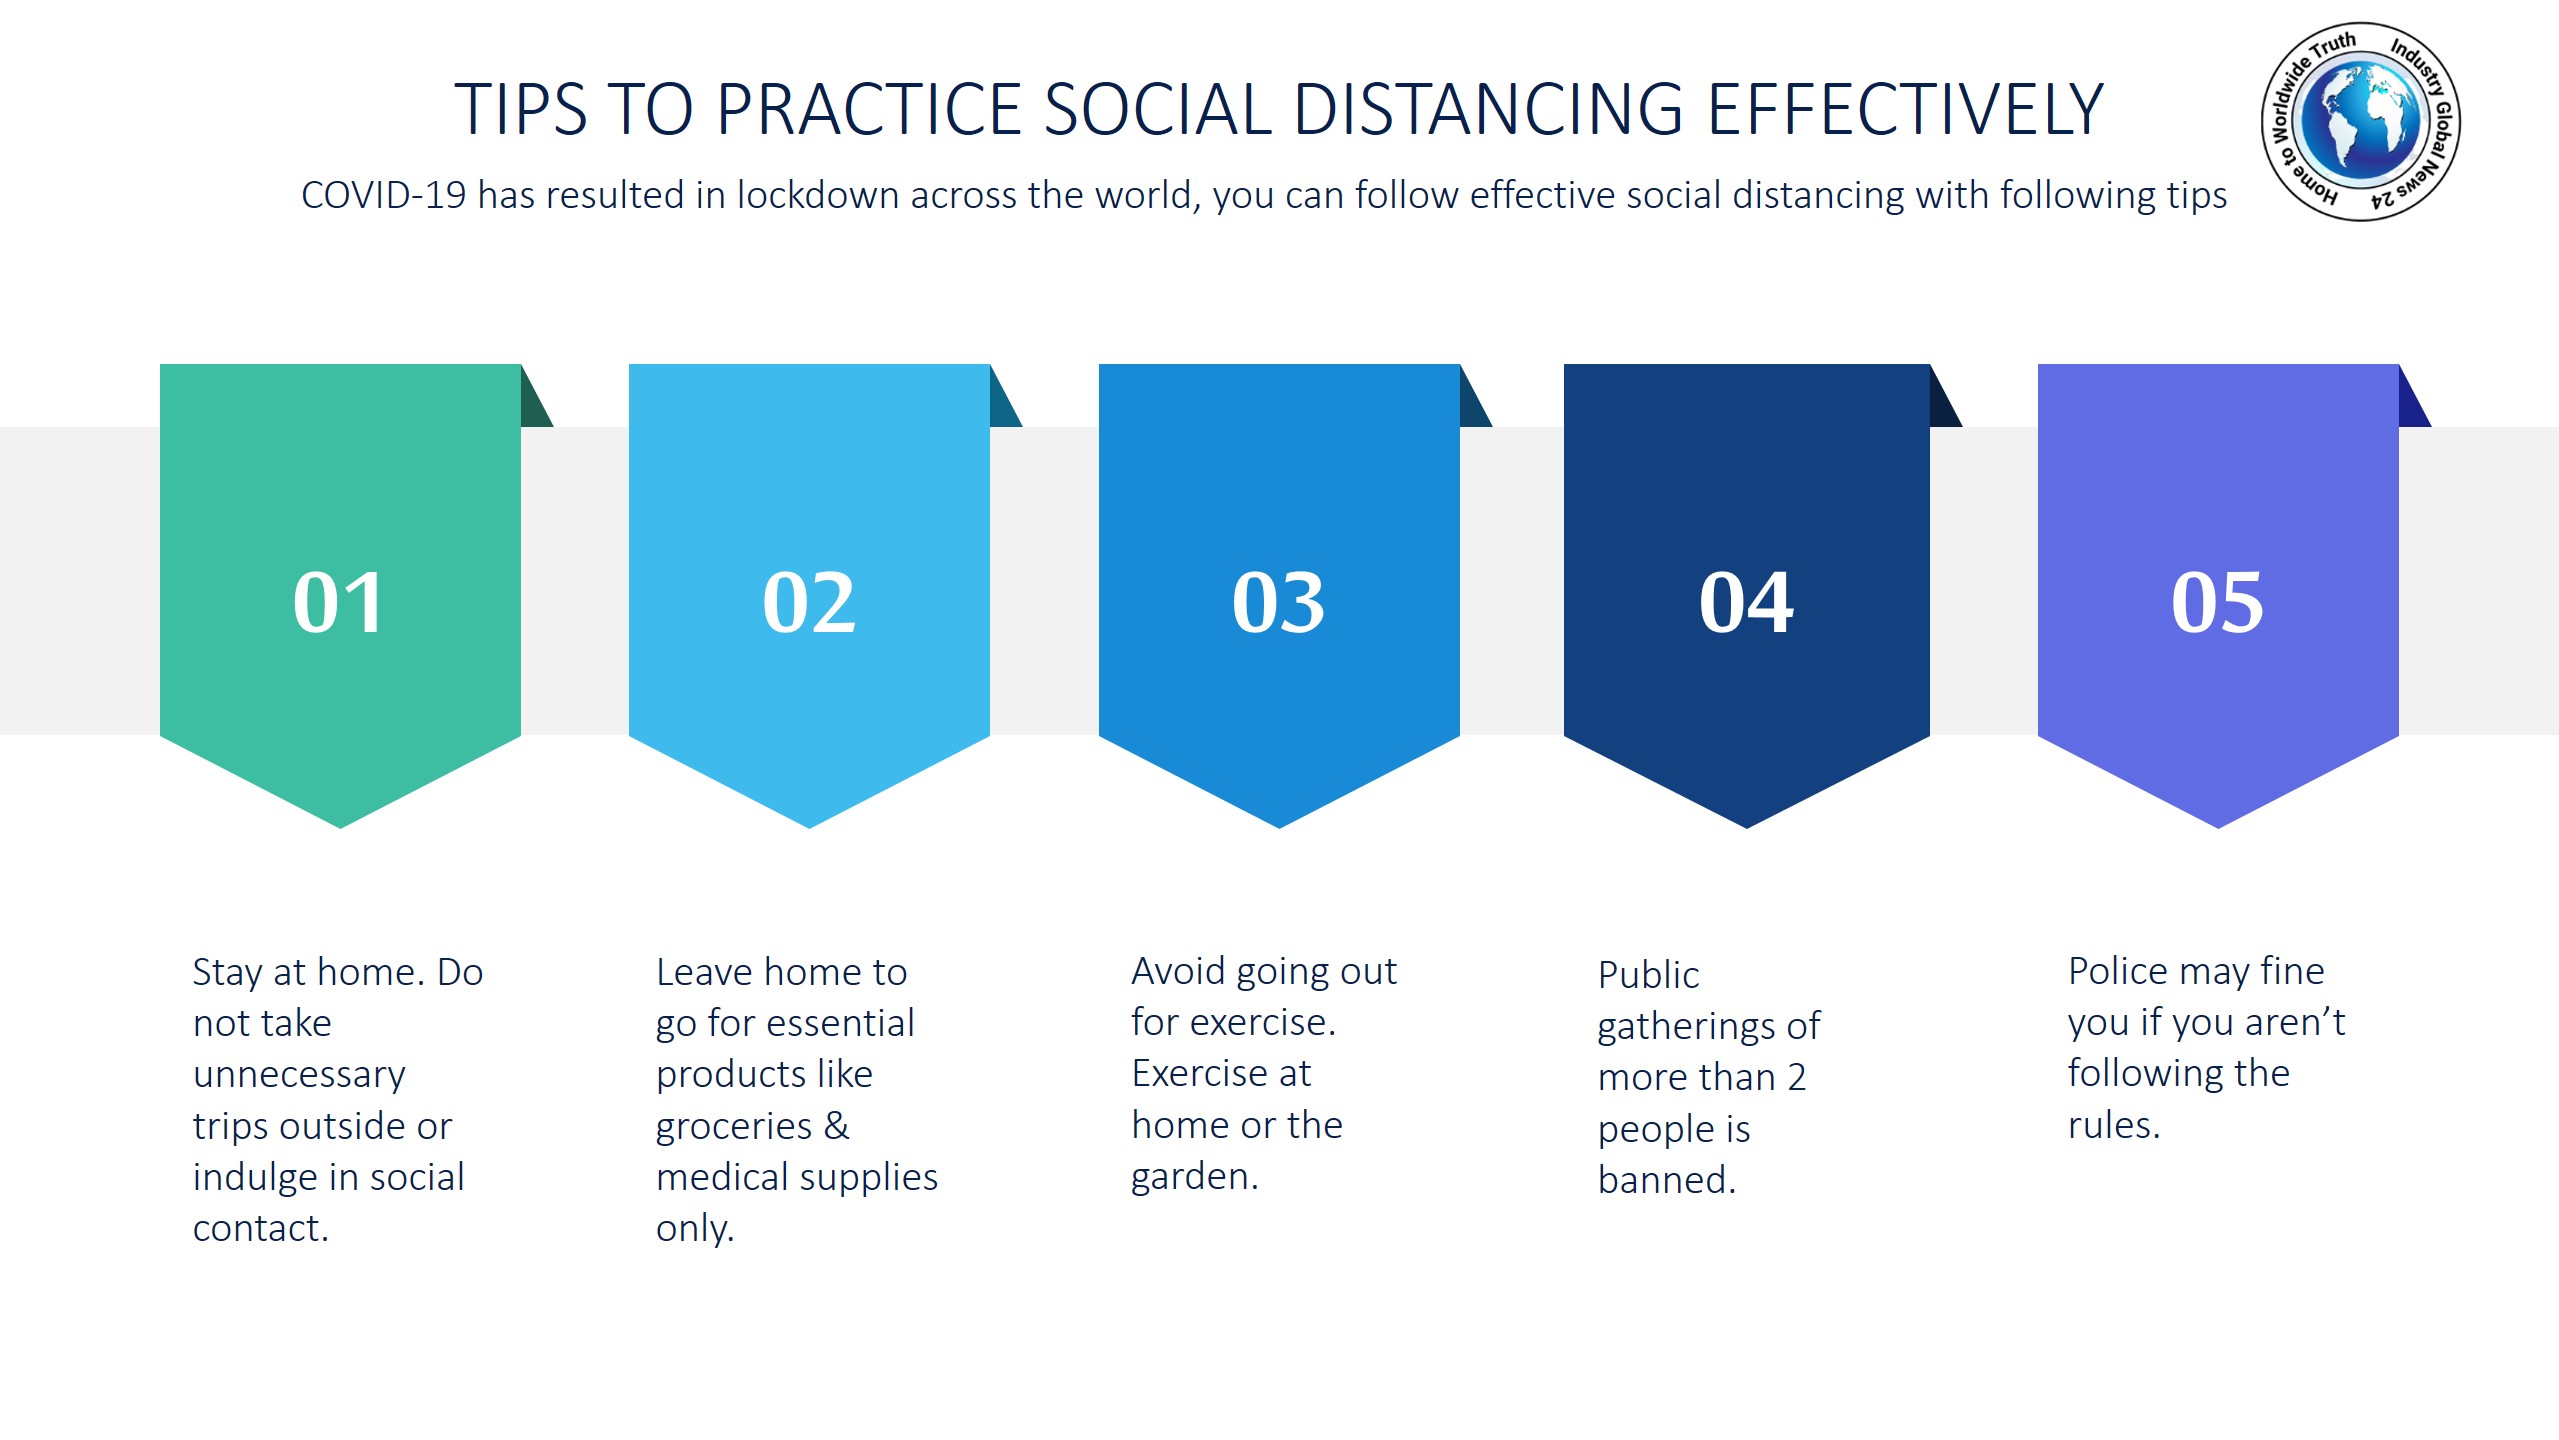 Tips to practice social distancing effectively